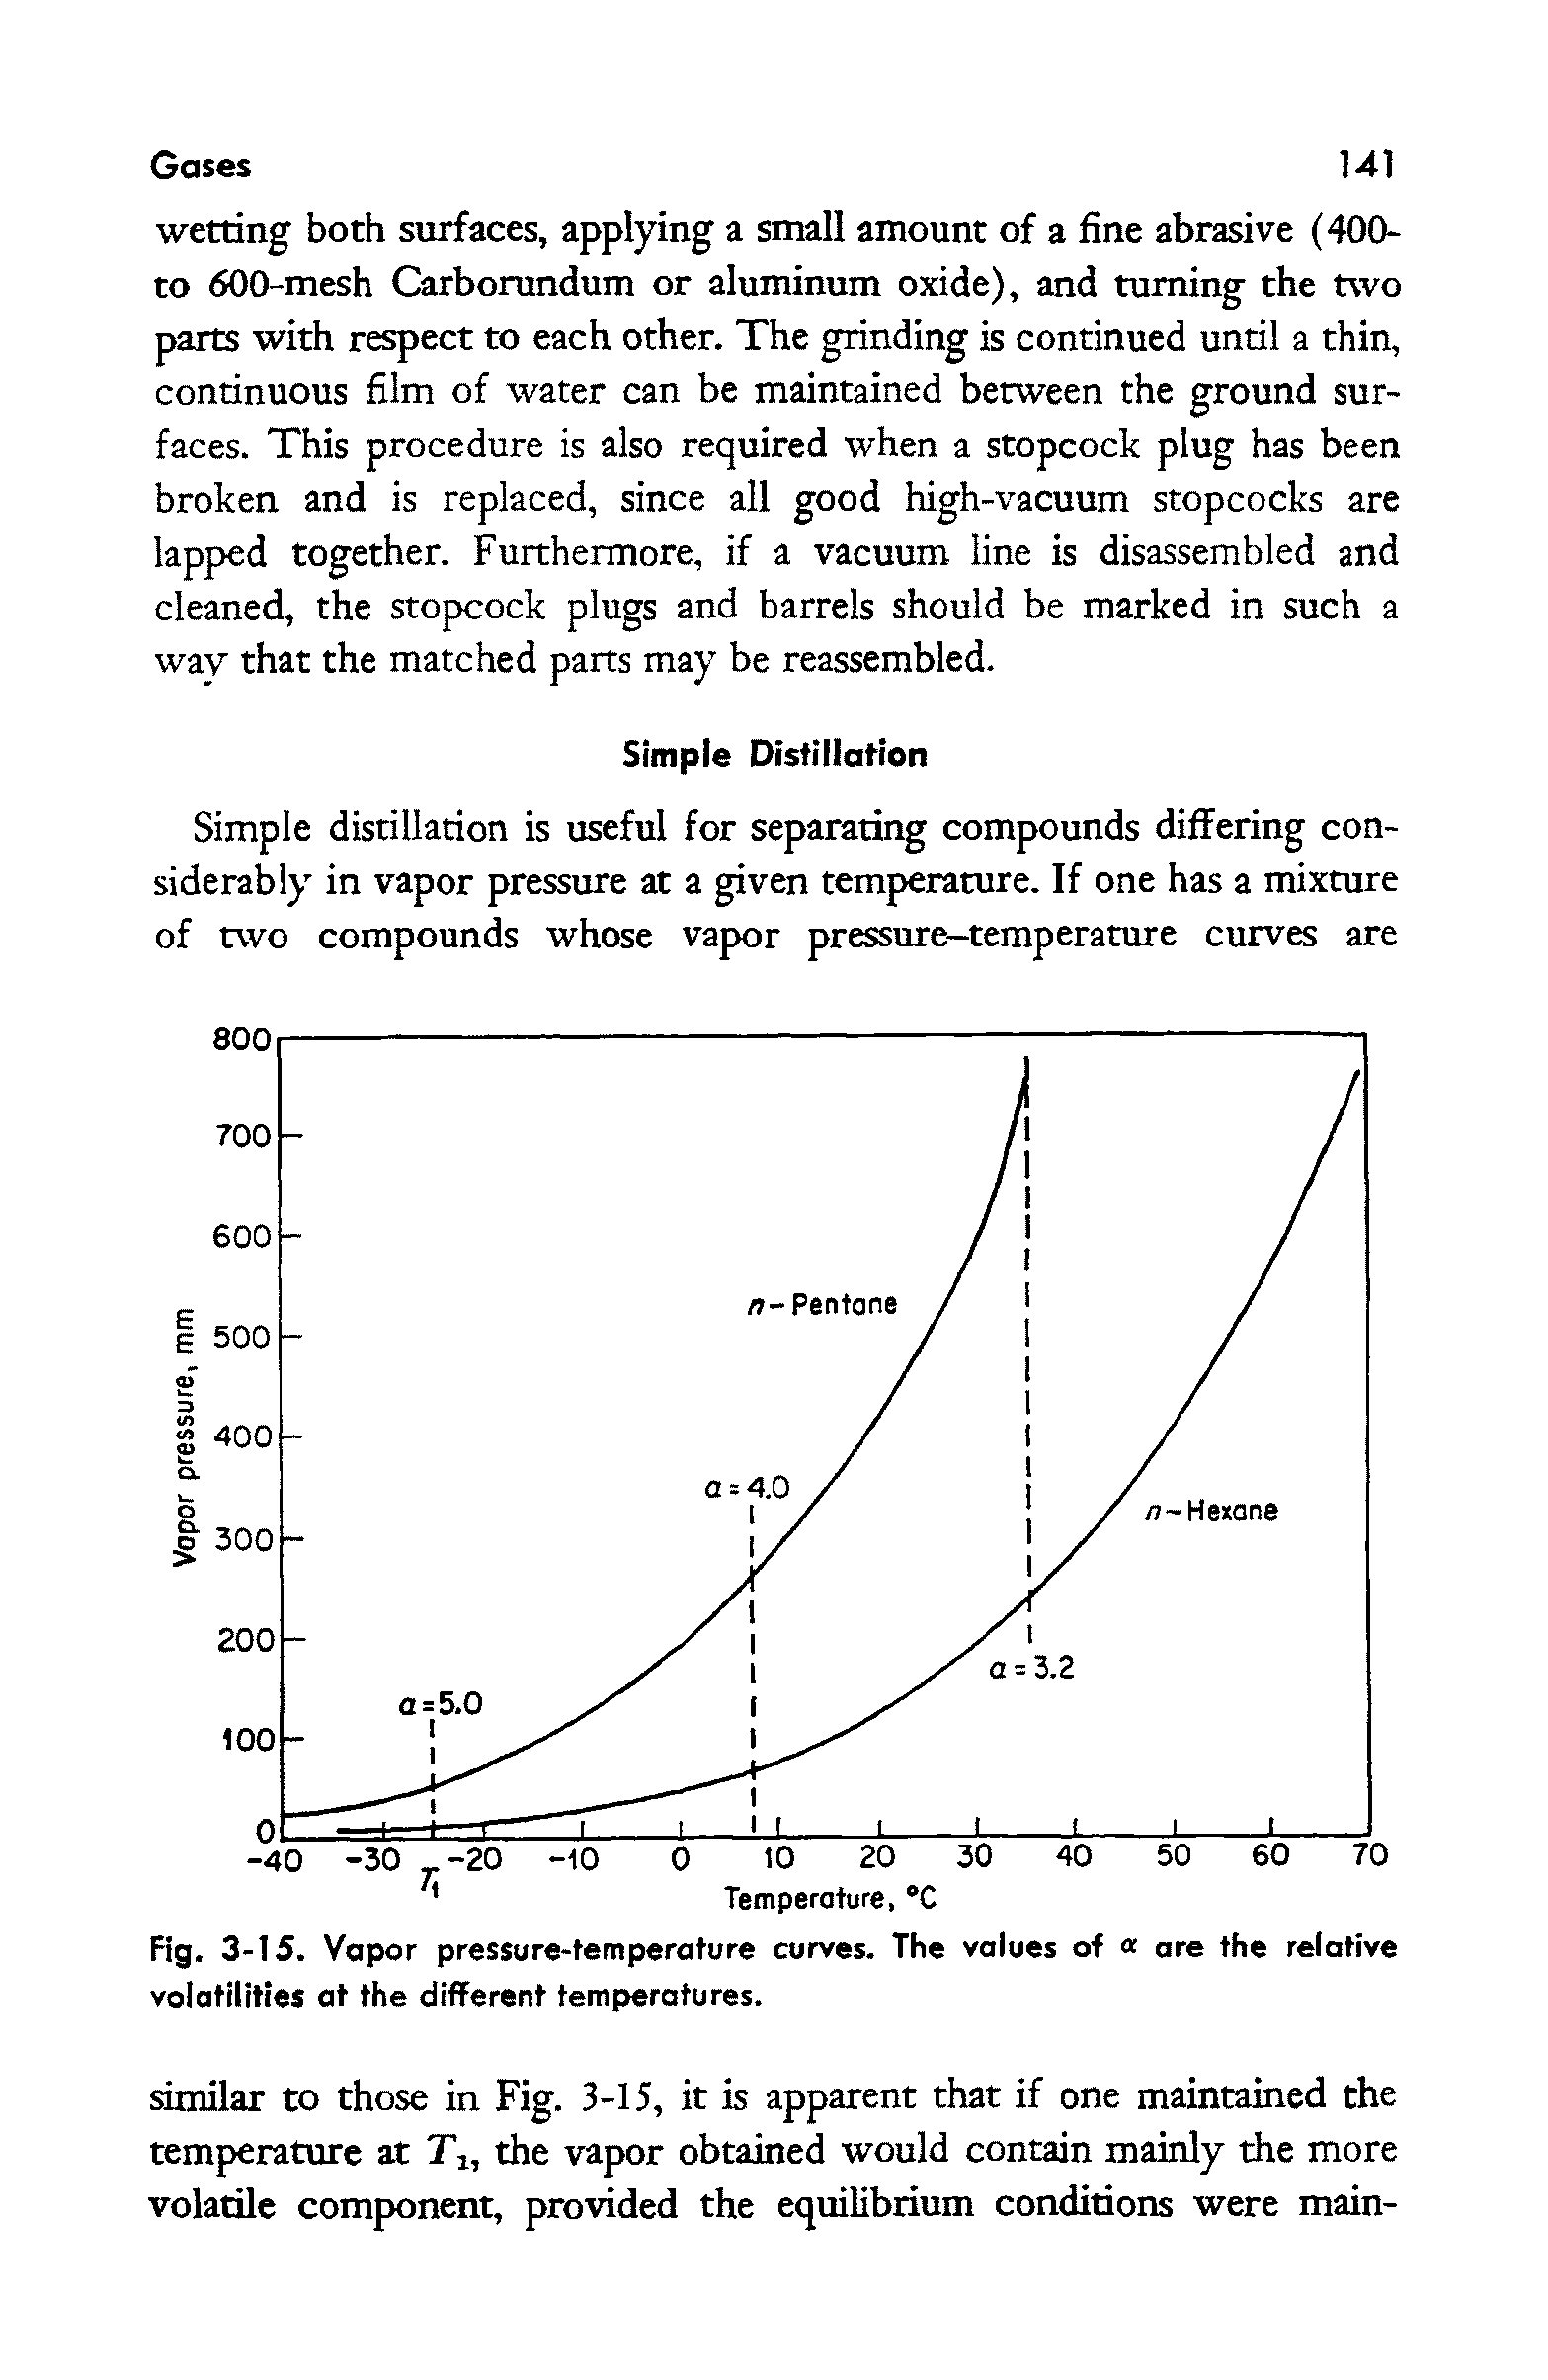 Fig. 3-15. Vapor pressure-temperature curves. The values of a are the relative volatilities at the different temperatures.